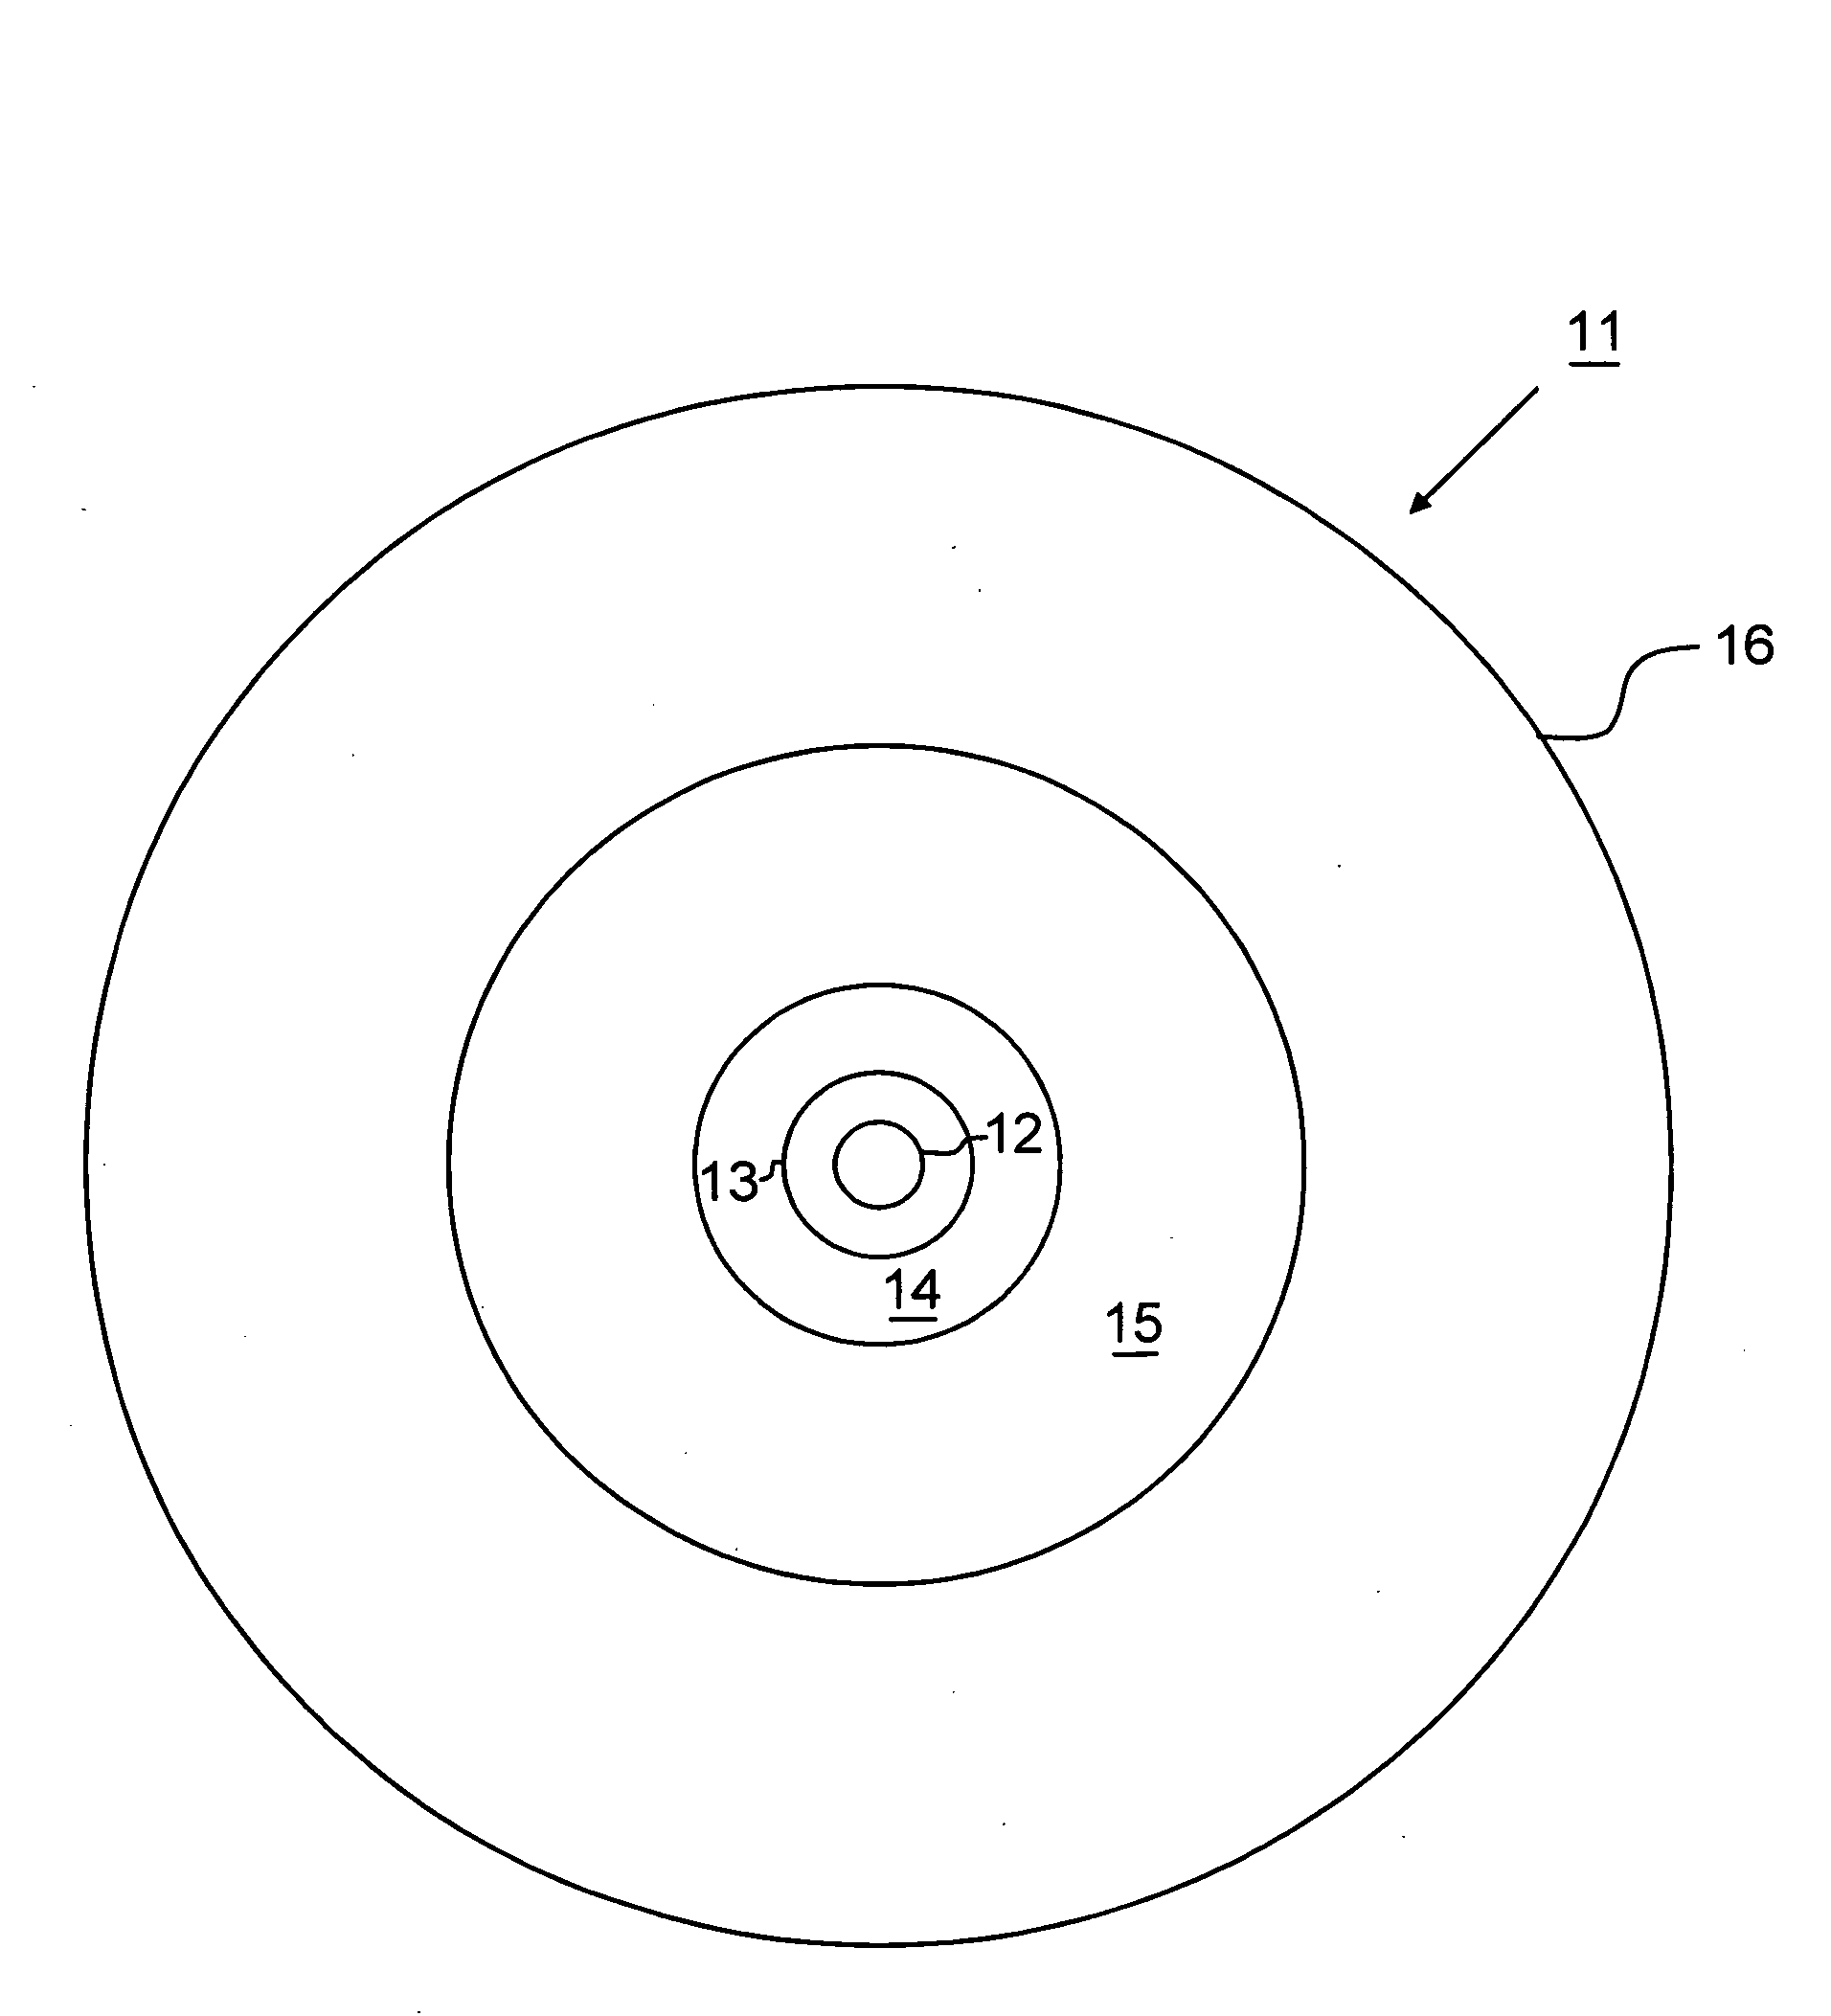 Low loss optical fiber designs and methods for their manufacture